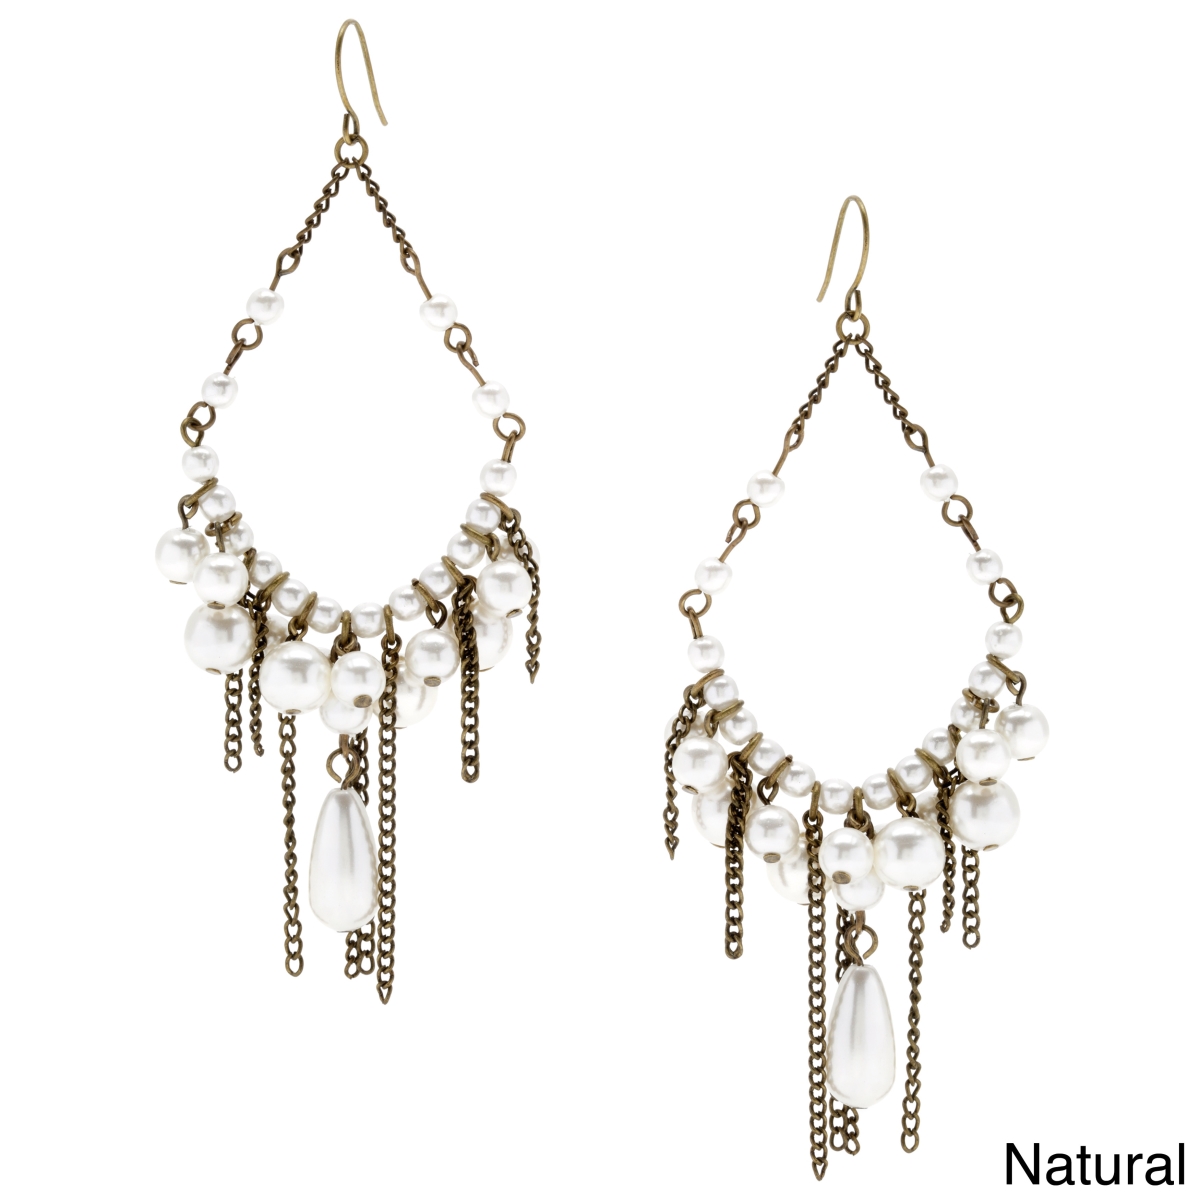 Picture of Alexa Starr 3612-EP-Natural Faux Pearl Chandelier Earrings with Burnished Chain Fringe